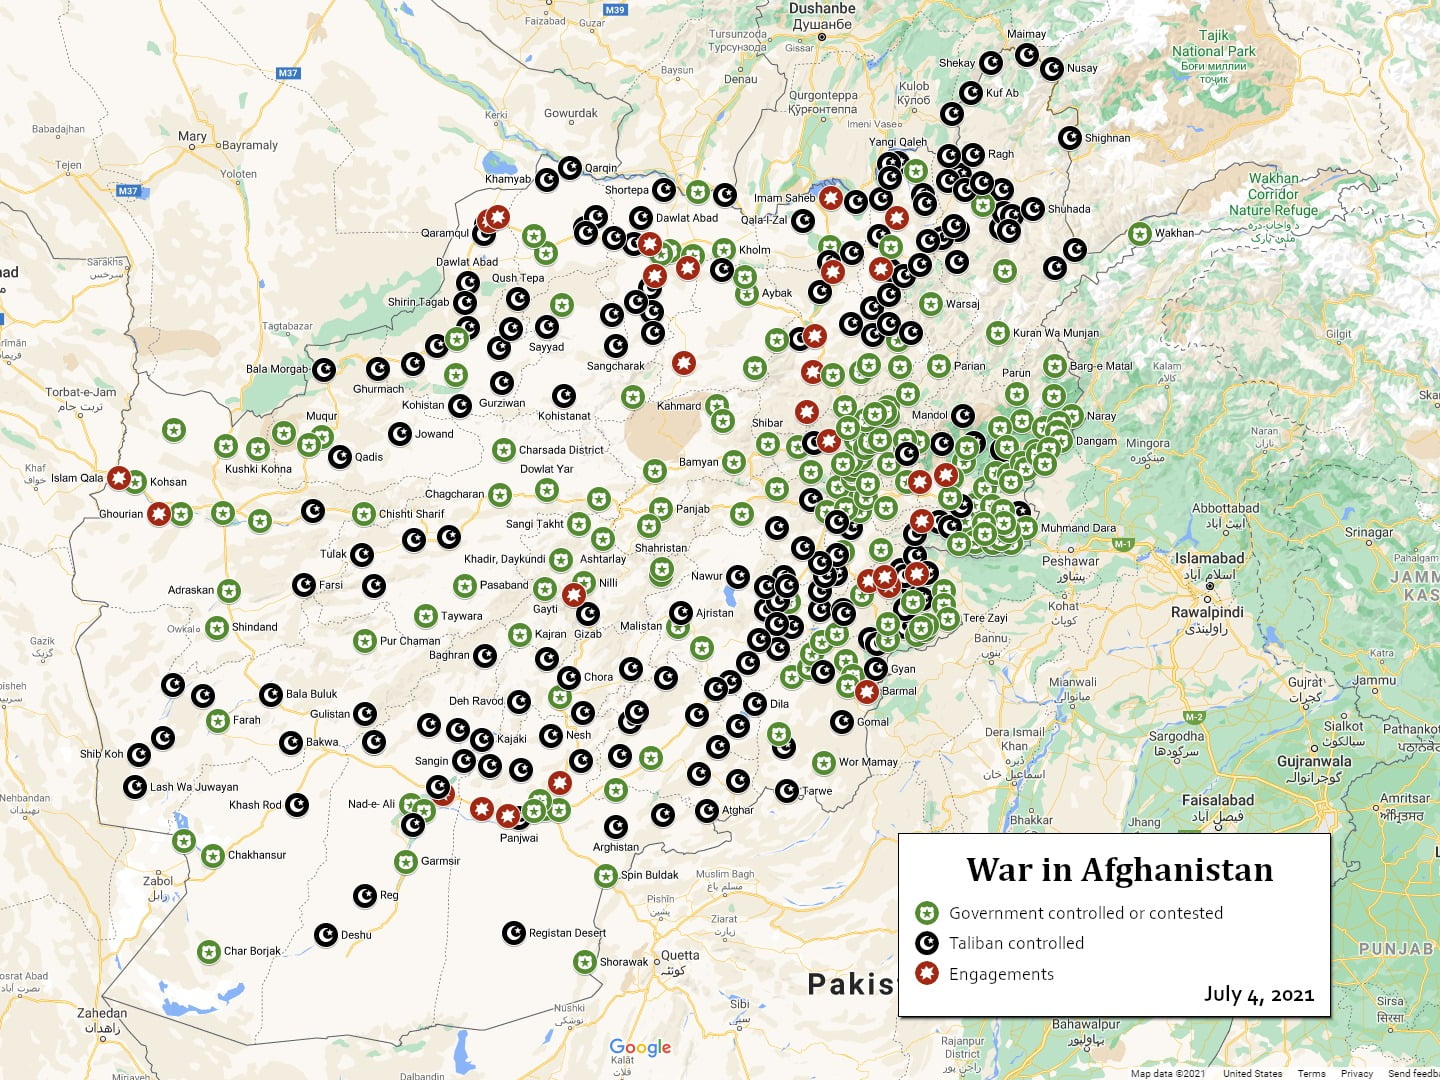 War in Afghanistan map for July 4, 2021